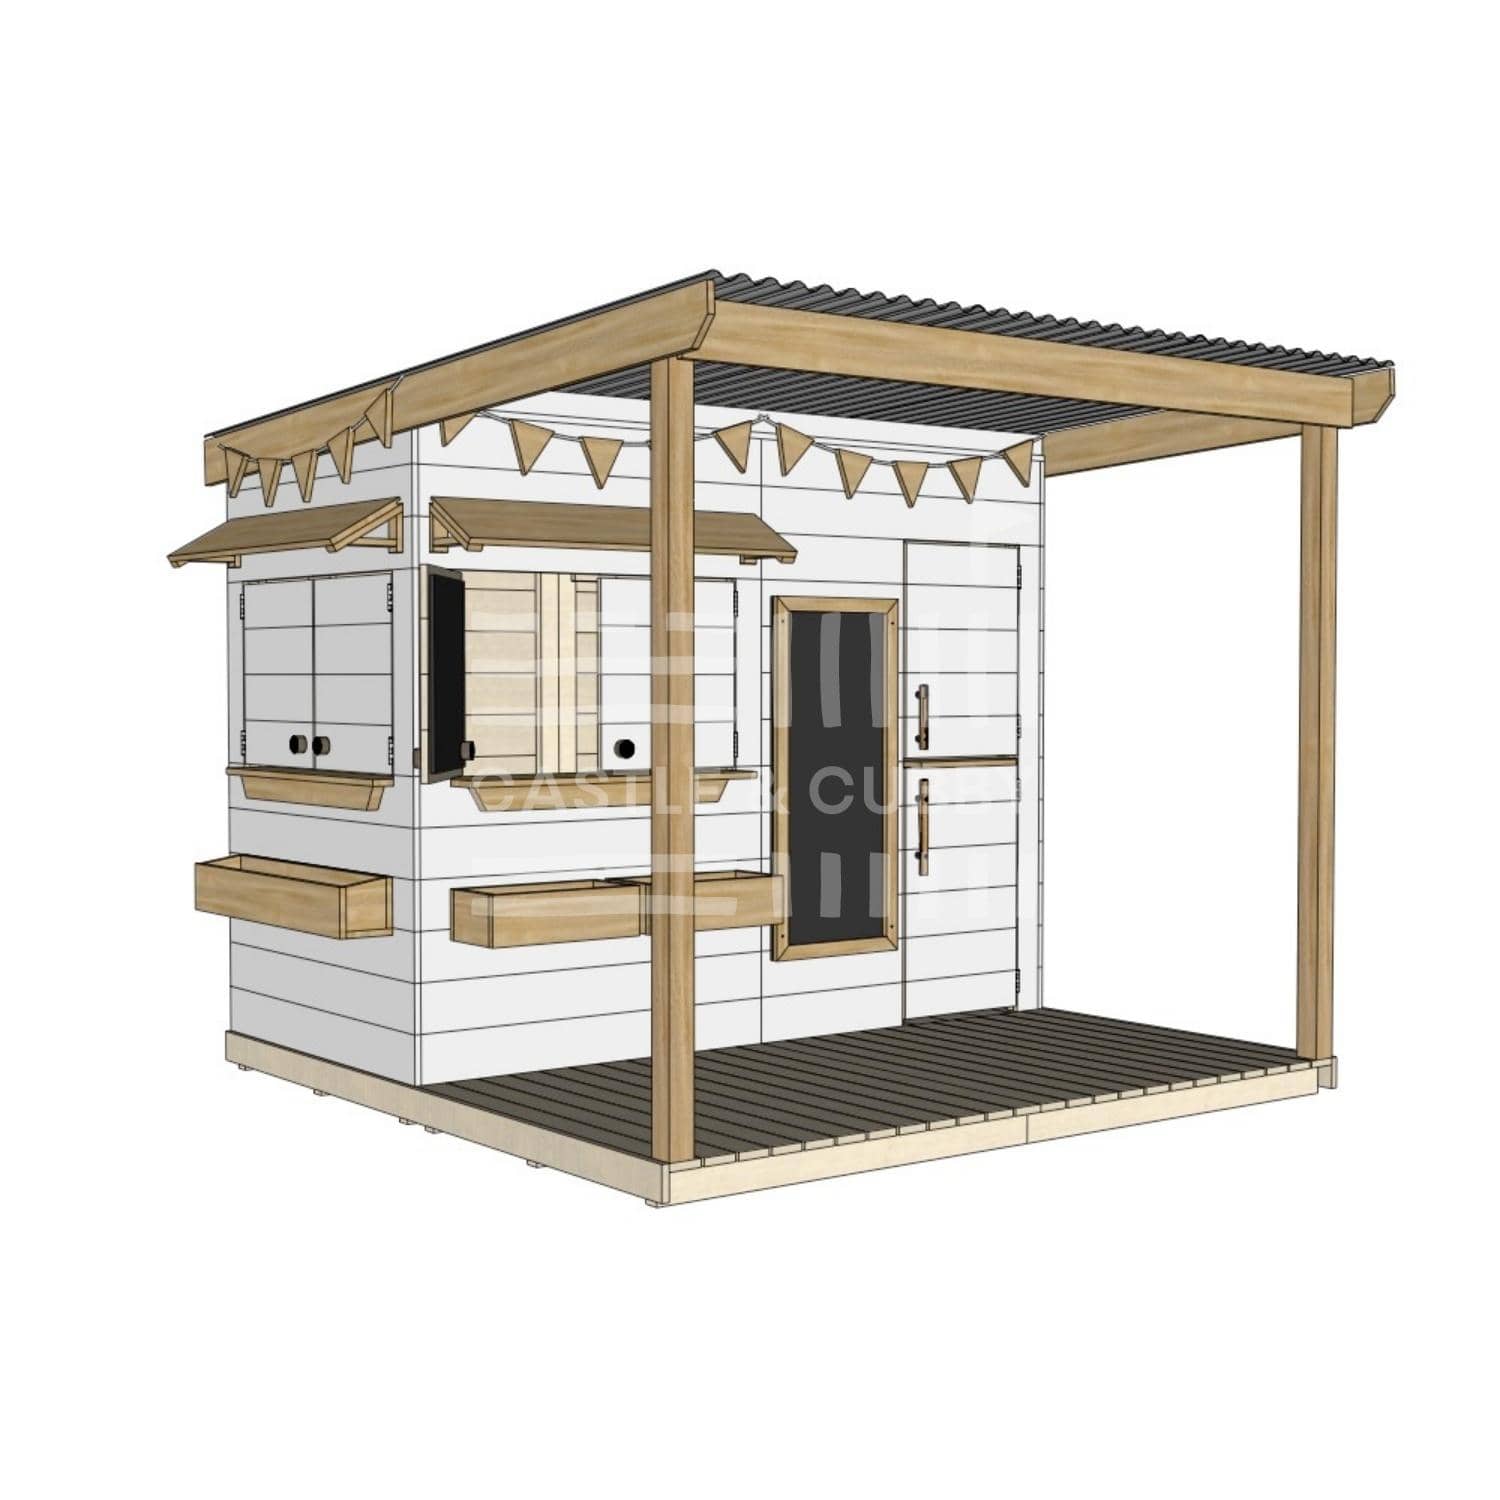 Painted timber extended height cubby house with front verandah and deck for family gardens midi rectangle size with accessories